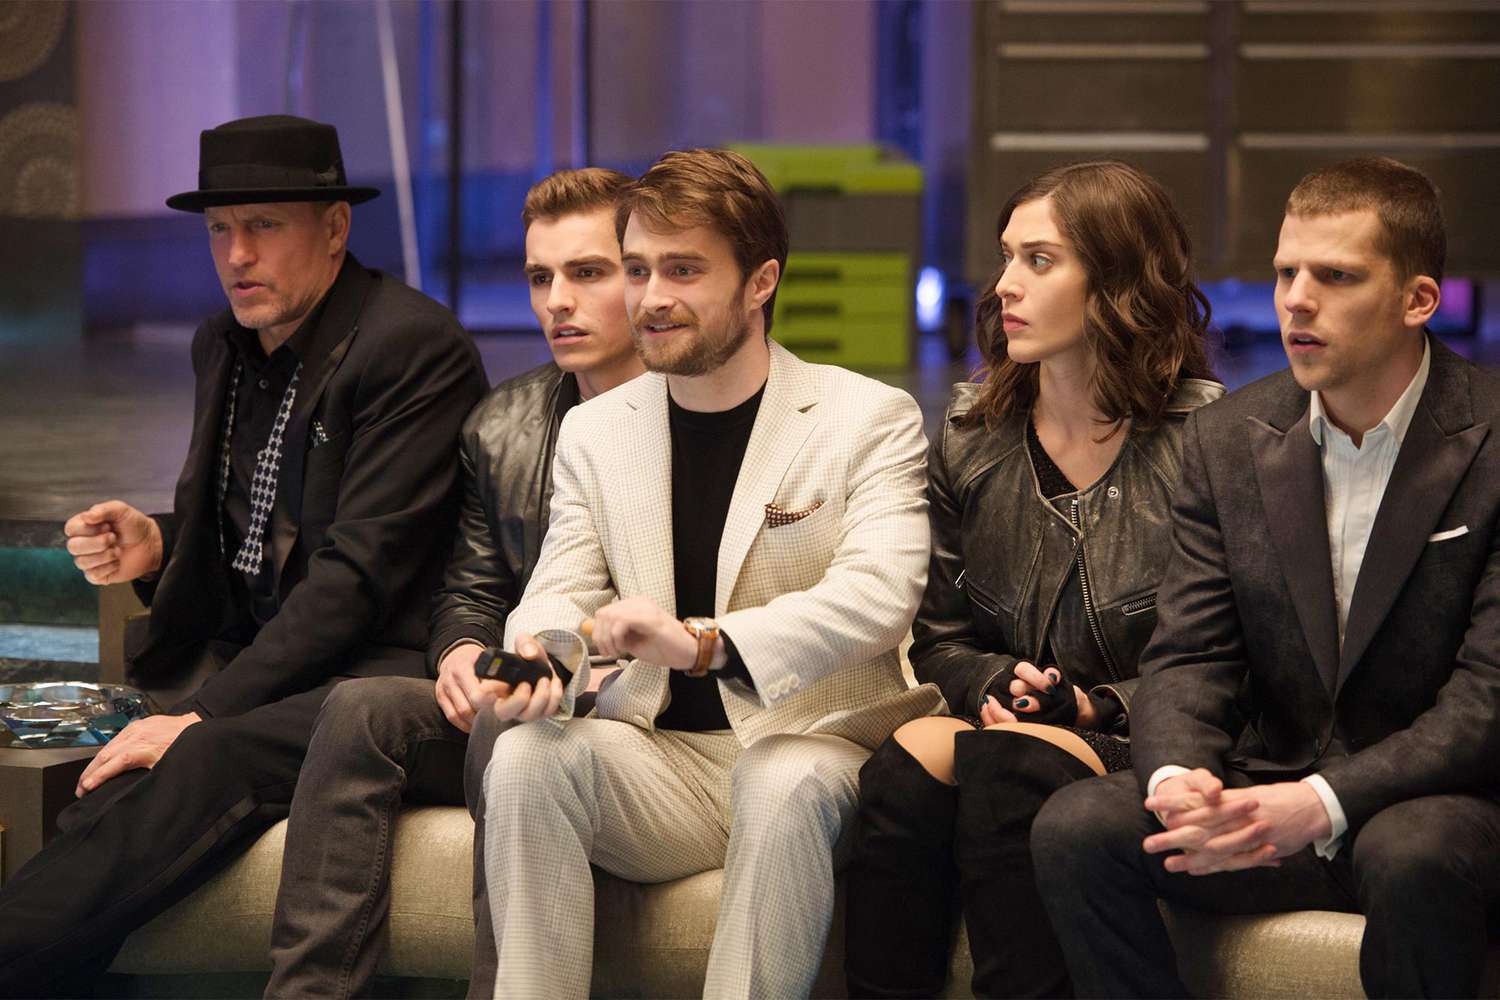 NOW YOU SEE ME 2